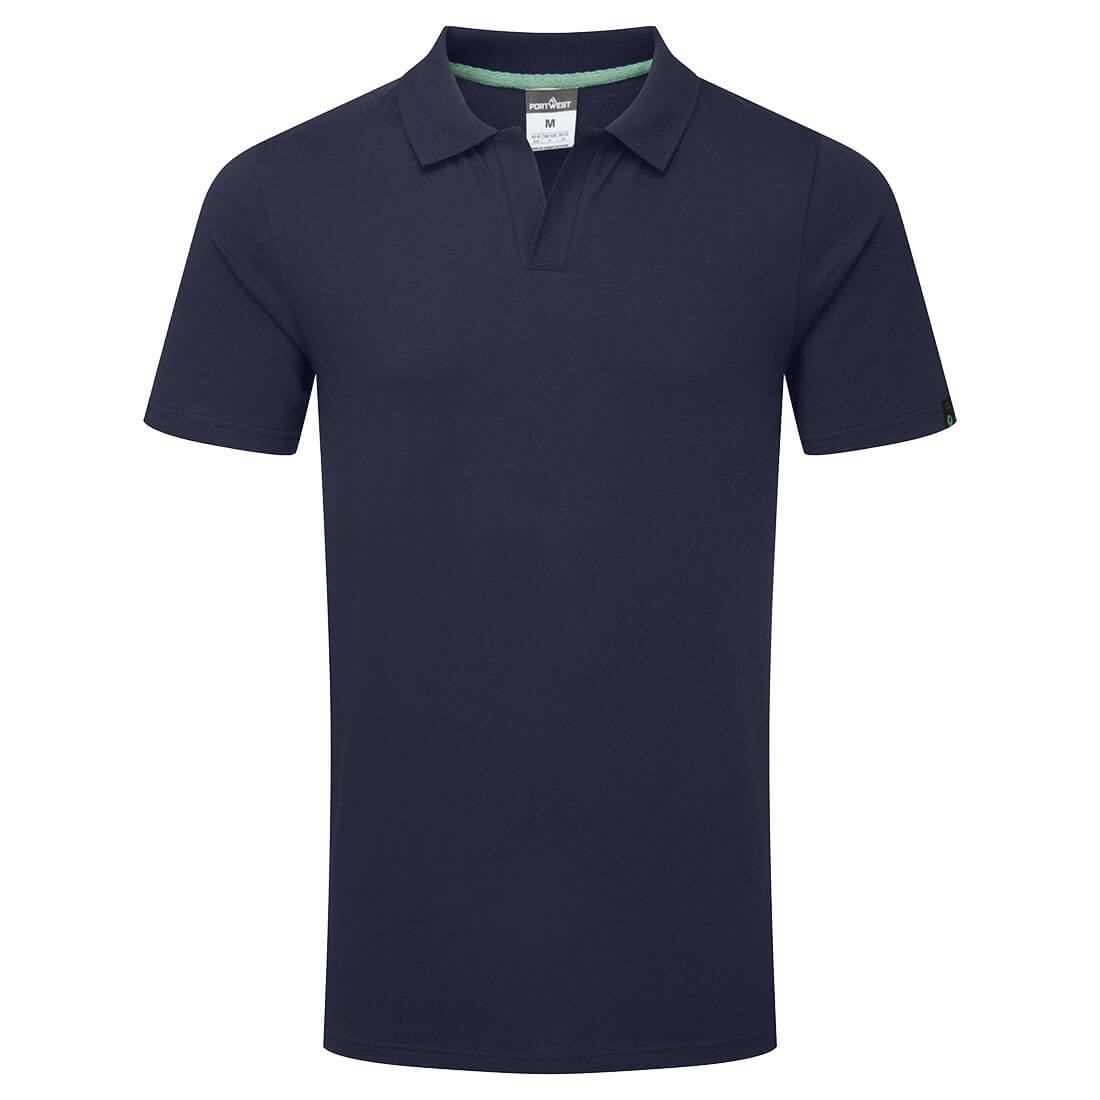 Organic Cotton Recyclable Polo Shirt - Safetywear